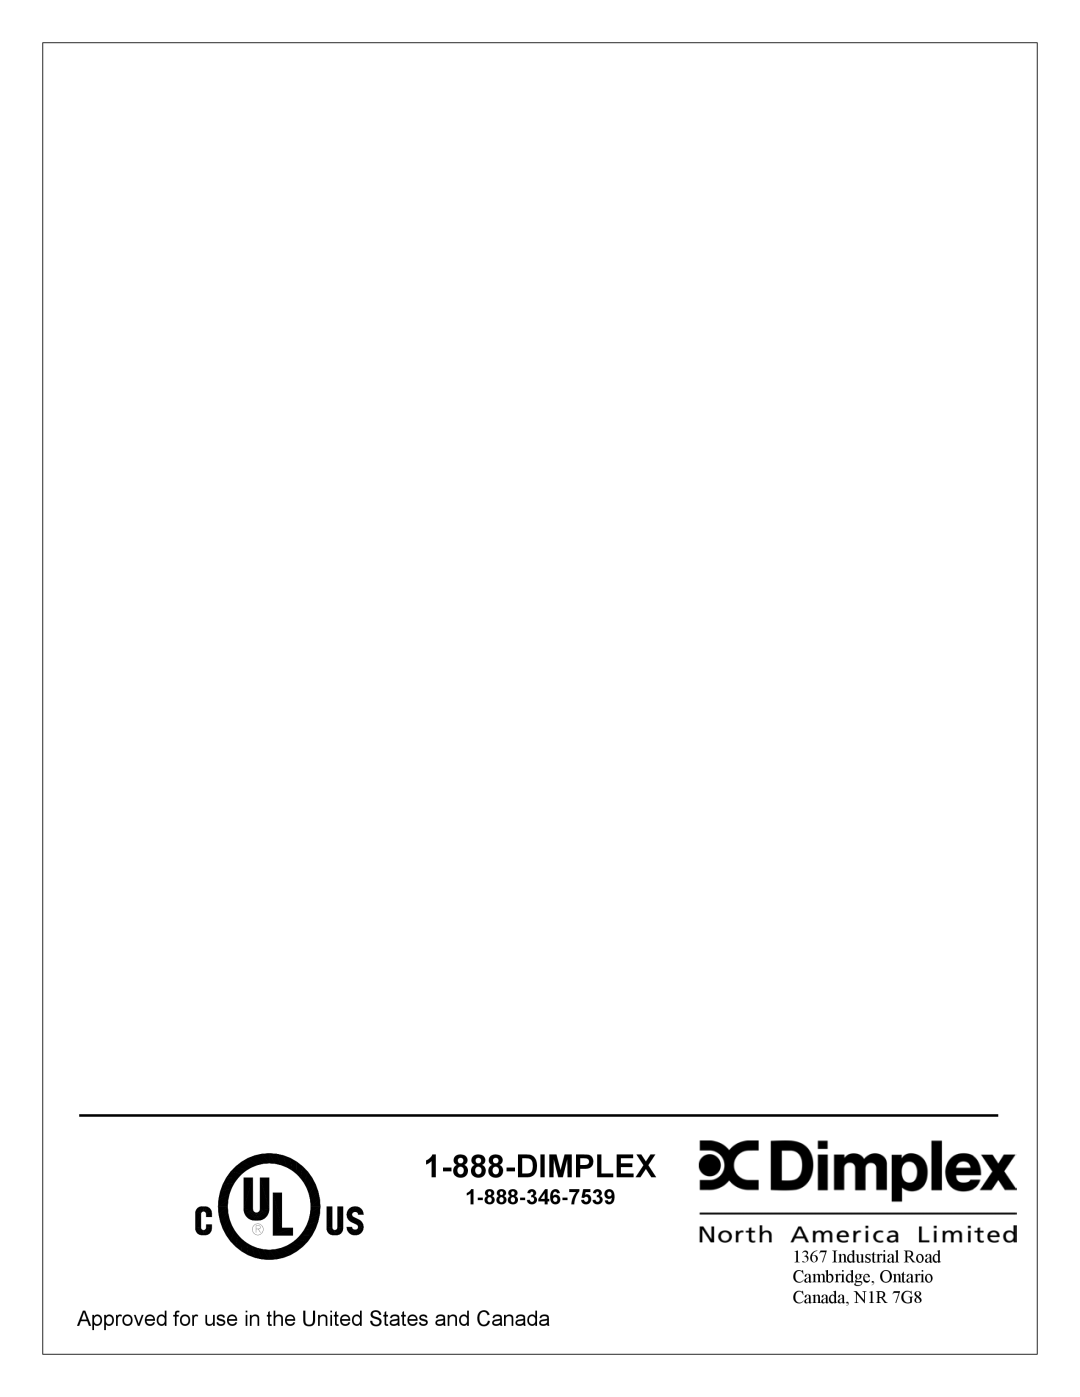 Dimplex DFI23TRIMX manual Dimplex, Approved for use in the United States and Canada, Industrial Road Cambridge, Ontario 